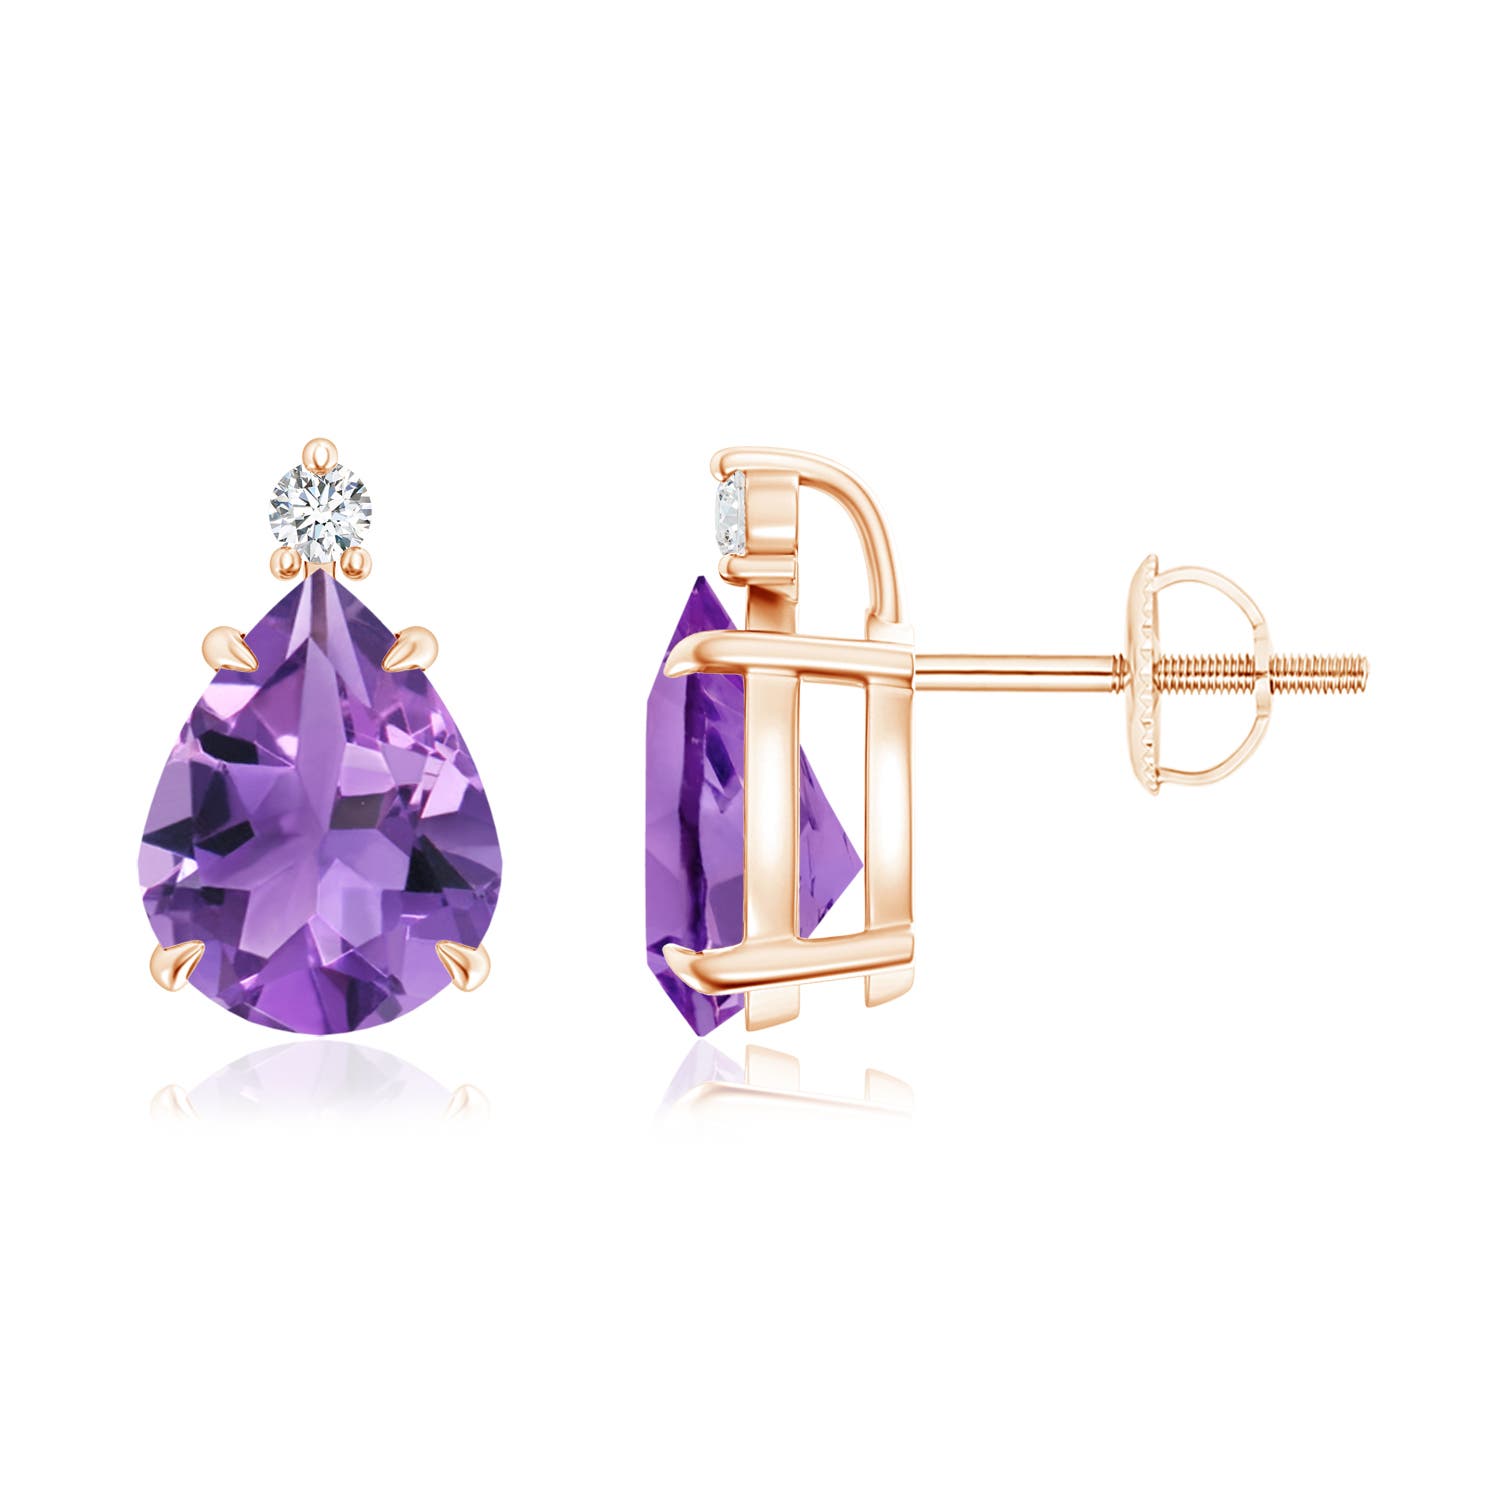 AA - Amethyst / 3.07 CT / 14 KT Rose Gold